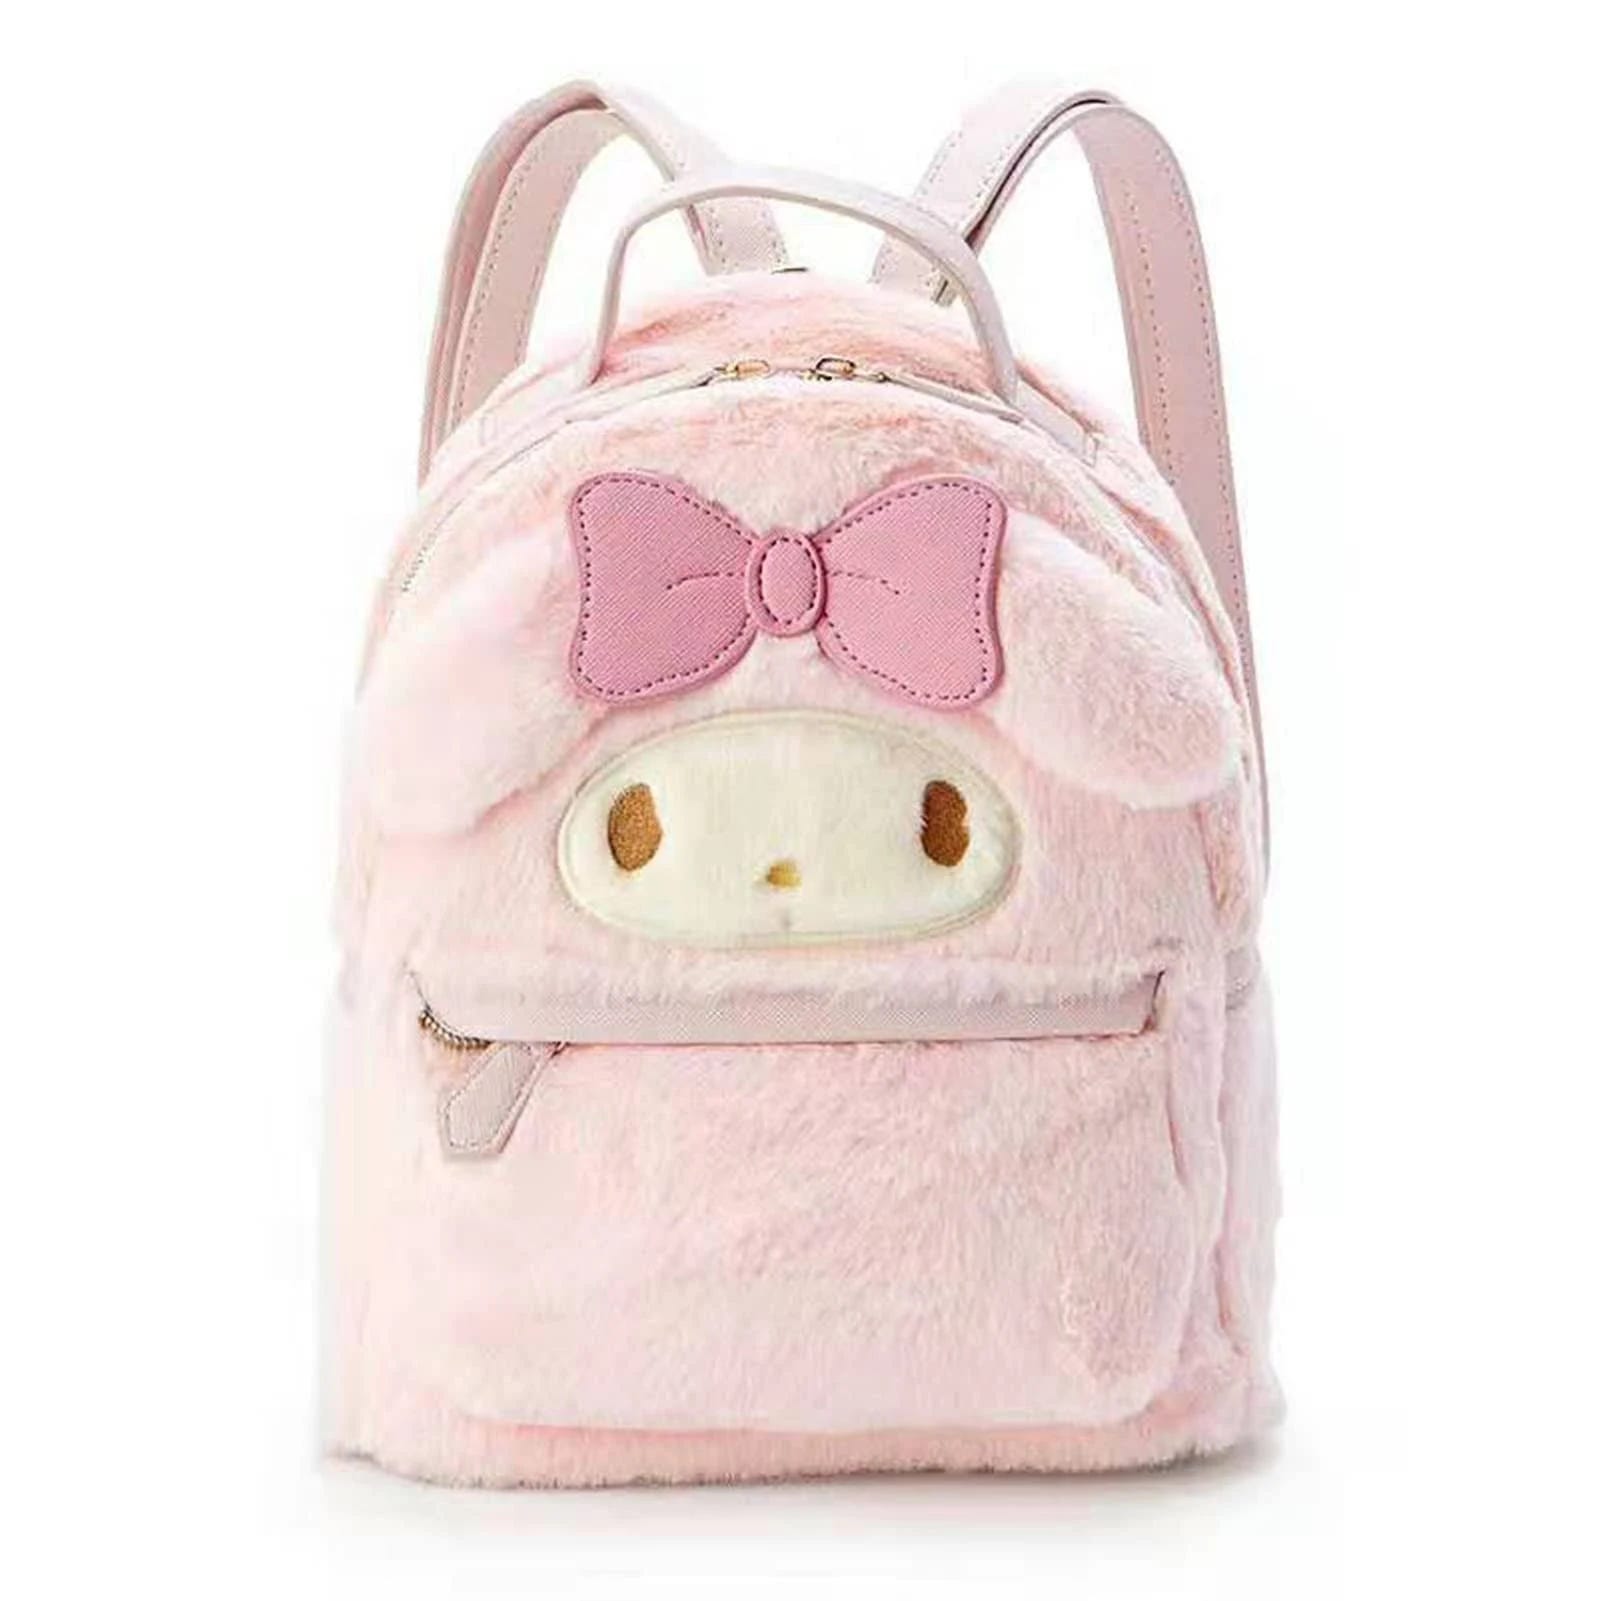 Adorable My Melody Cartoon Plush Backpack for Kids | Image